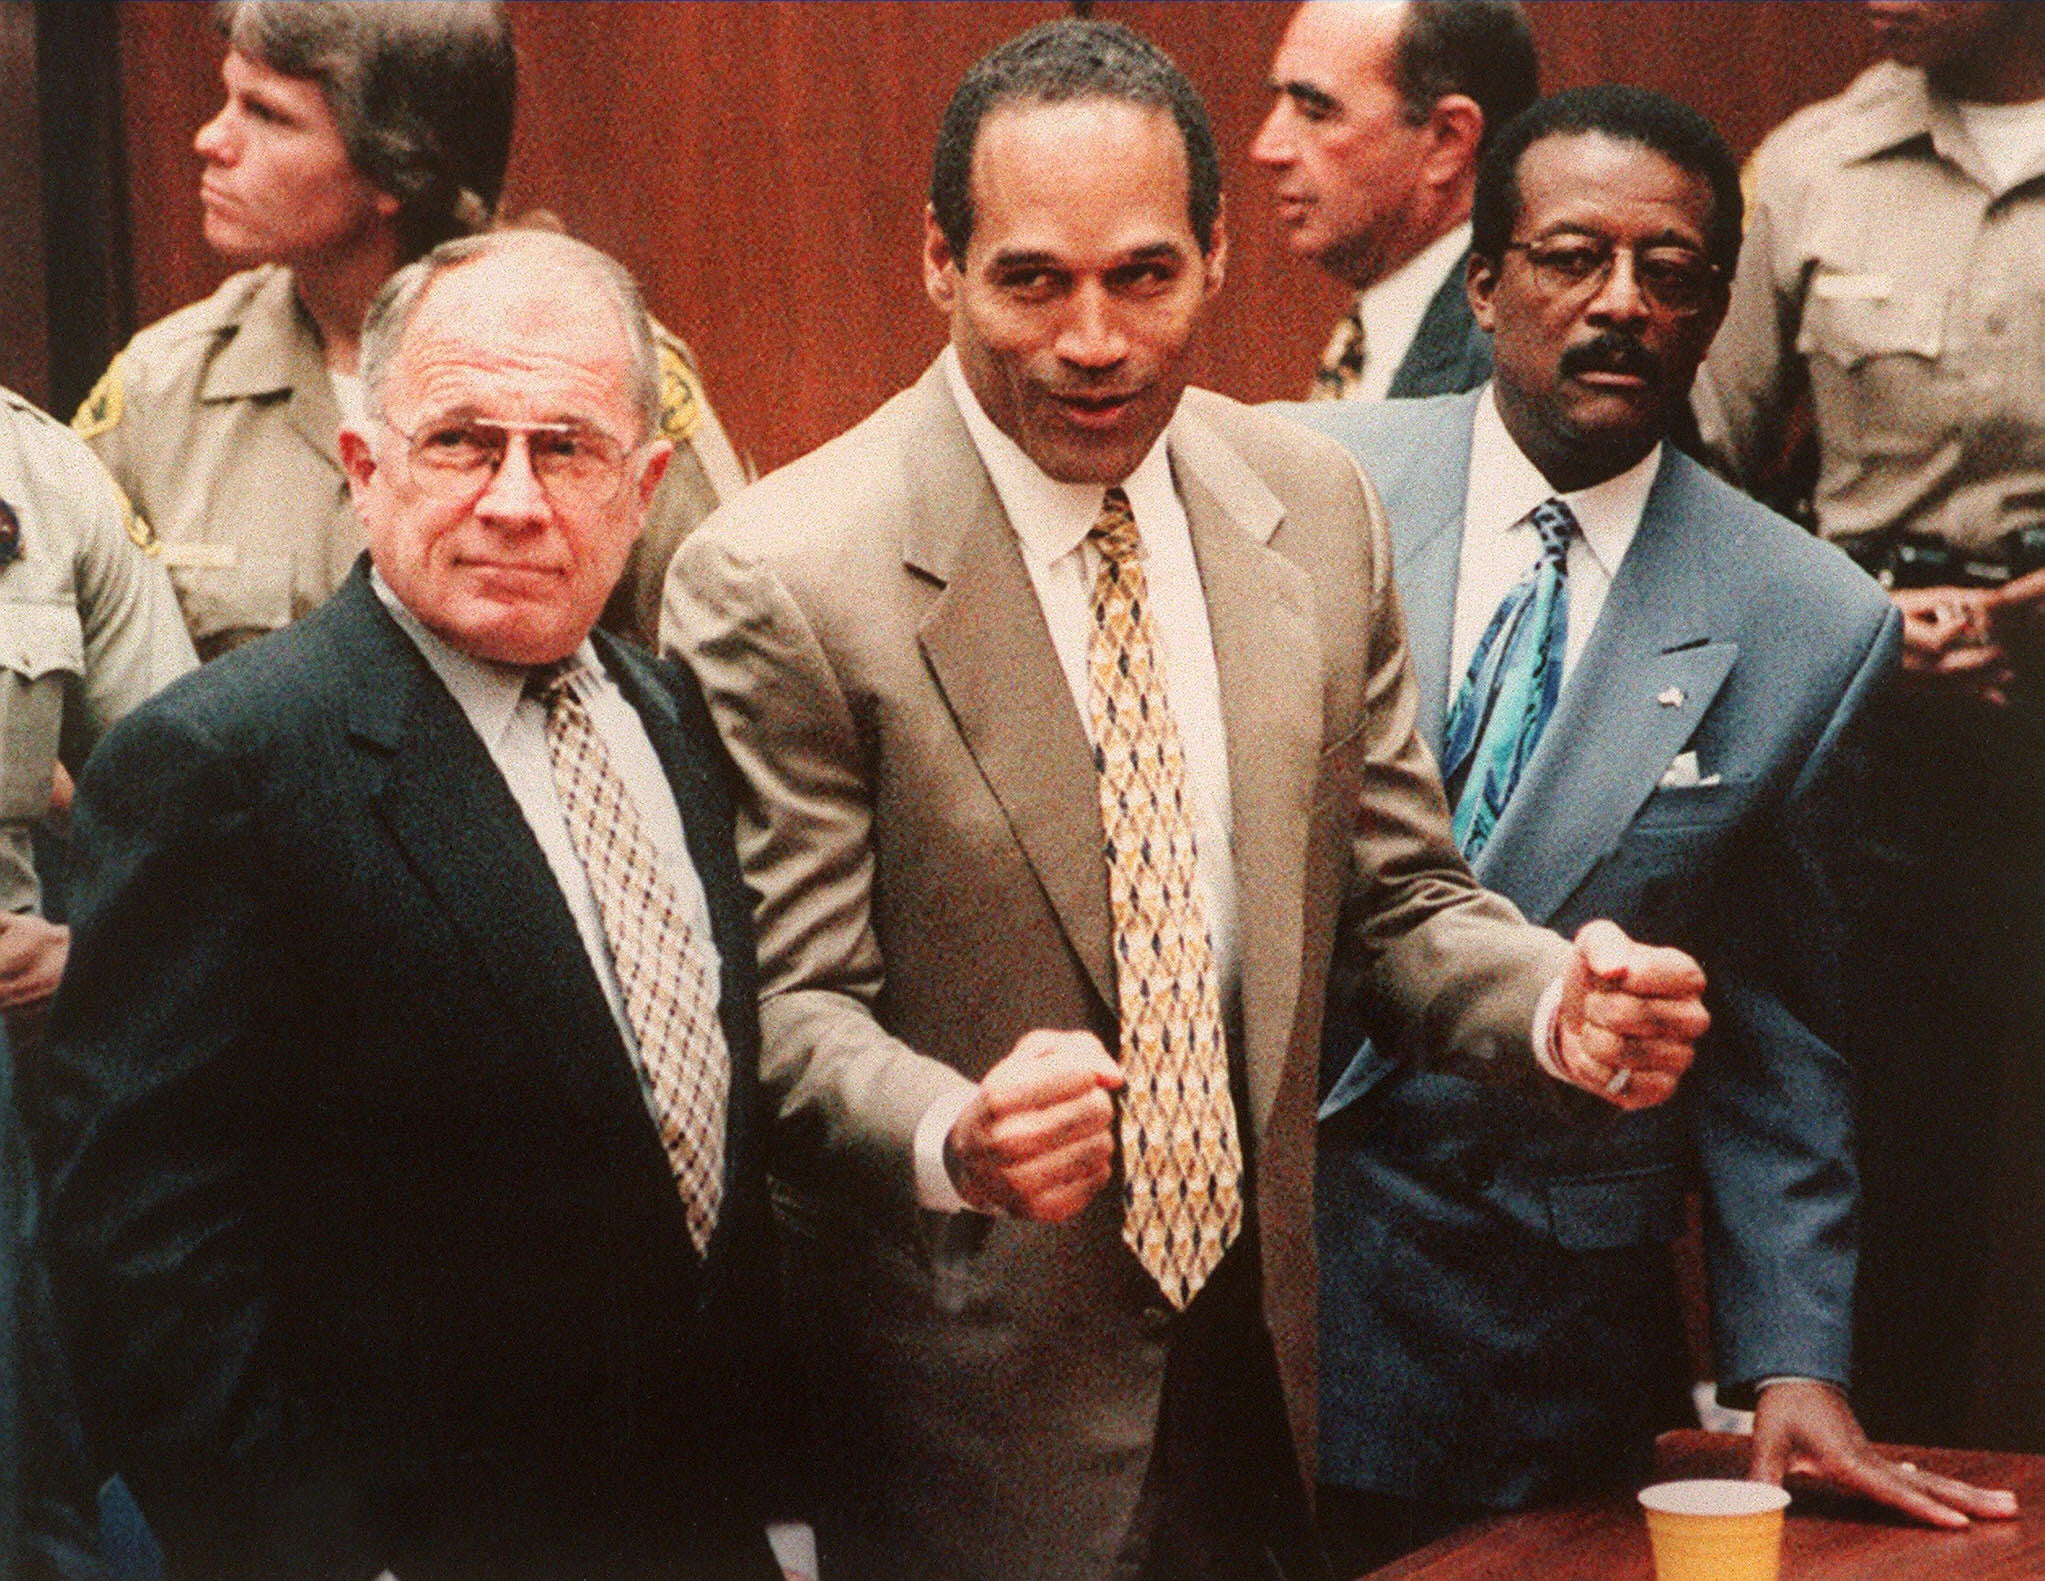 O.J. Simpson's Not-Guilty Verdict was ‘Payback’ for Rodney King, Says Juror
